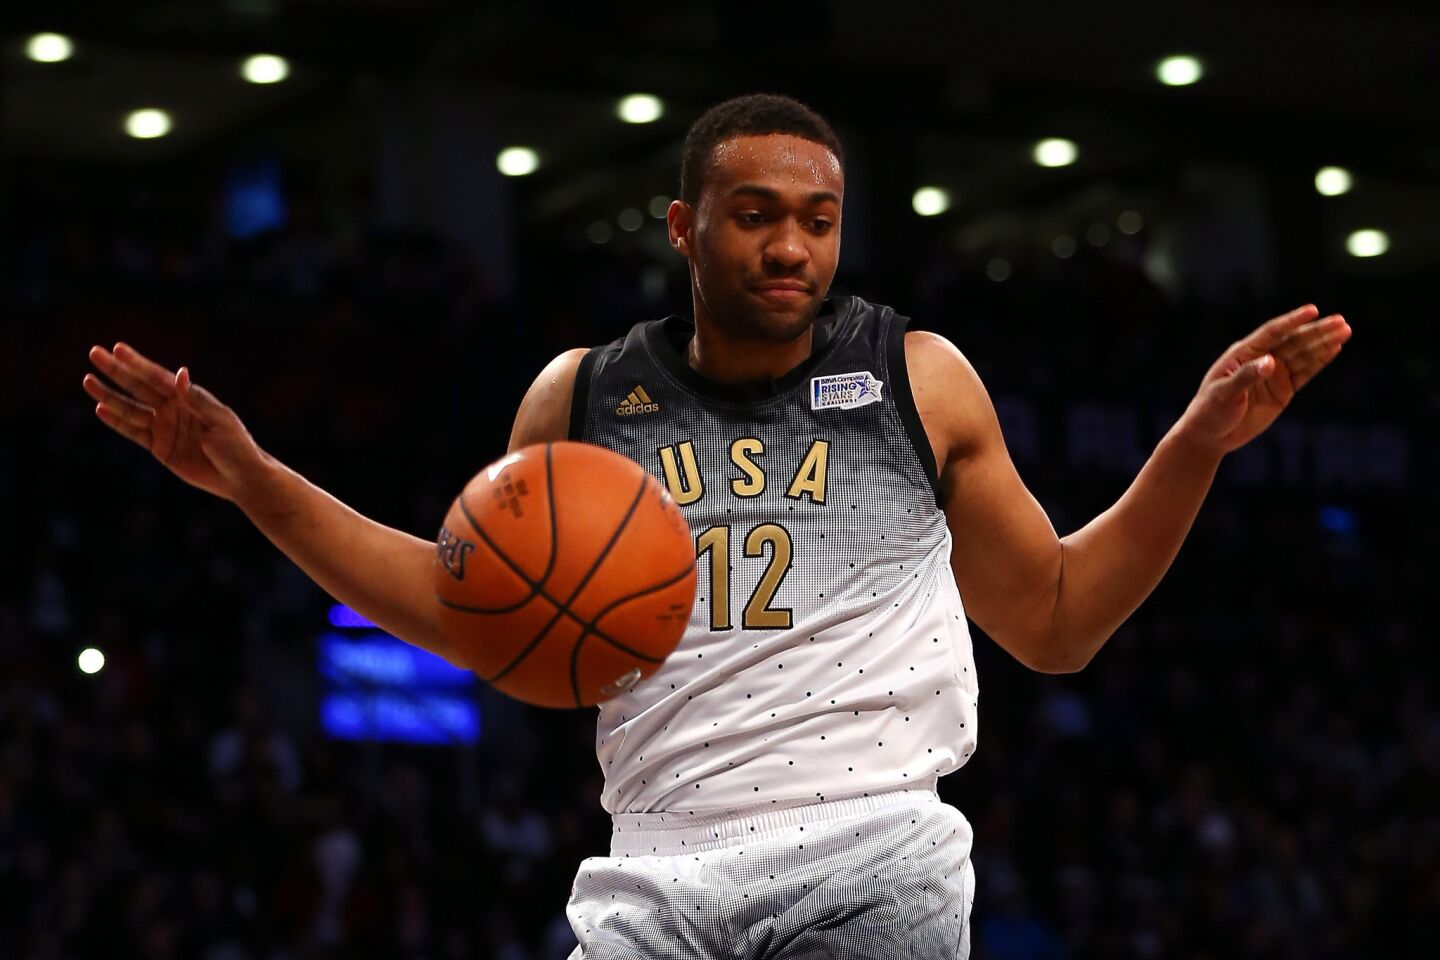 Bucks forward Jabari Parker of the U.S. team after finishing off a dunk against the World team in the Rising Stars Challenge.